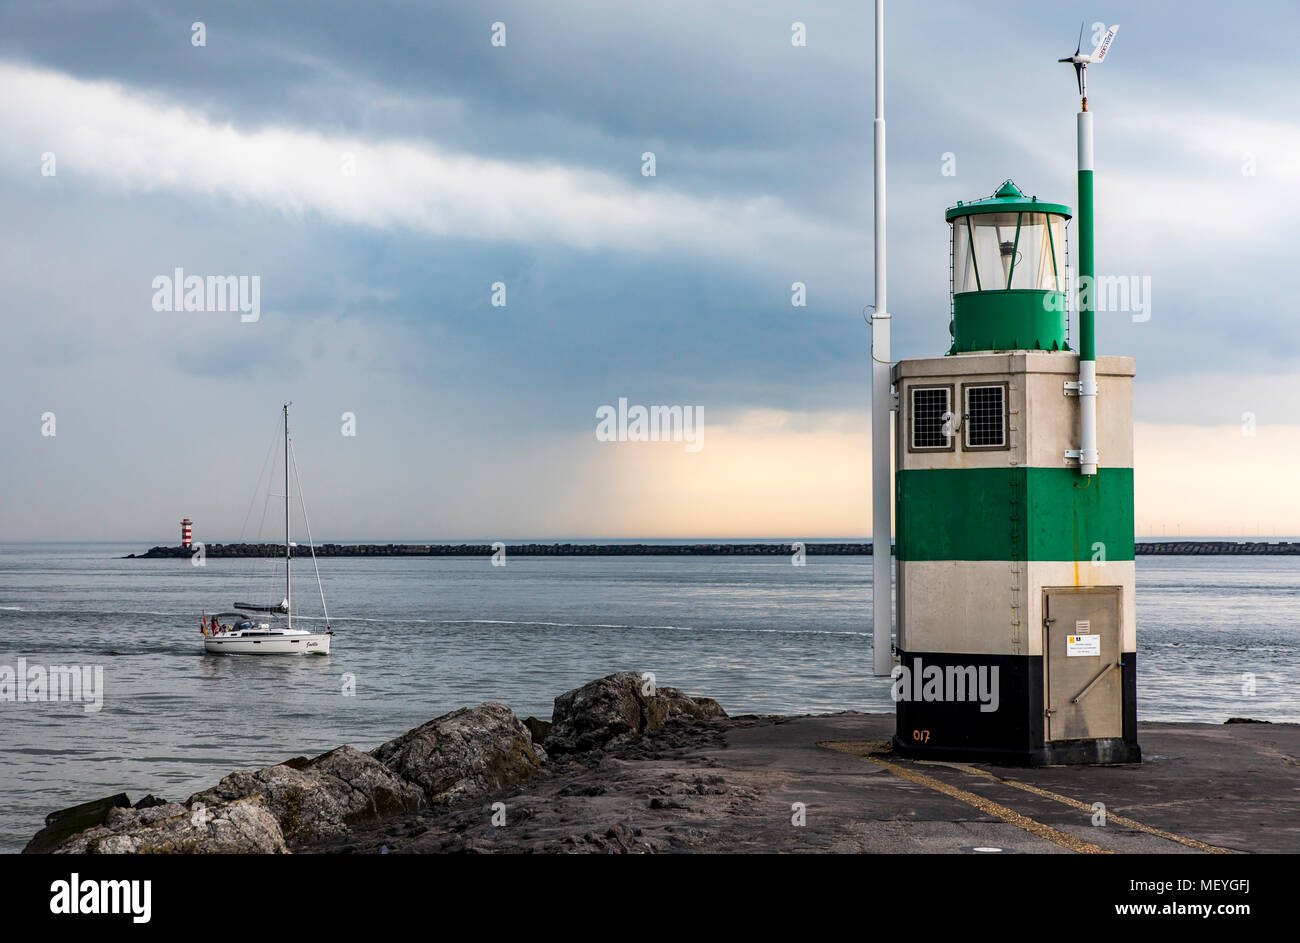 Sailboat enters the port of Ijmuiden, in North Holland, Netherlands, Stock Photo